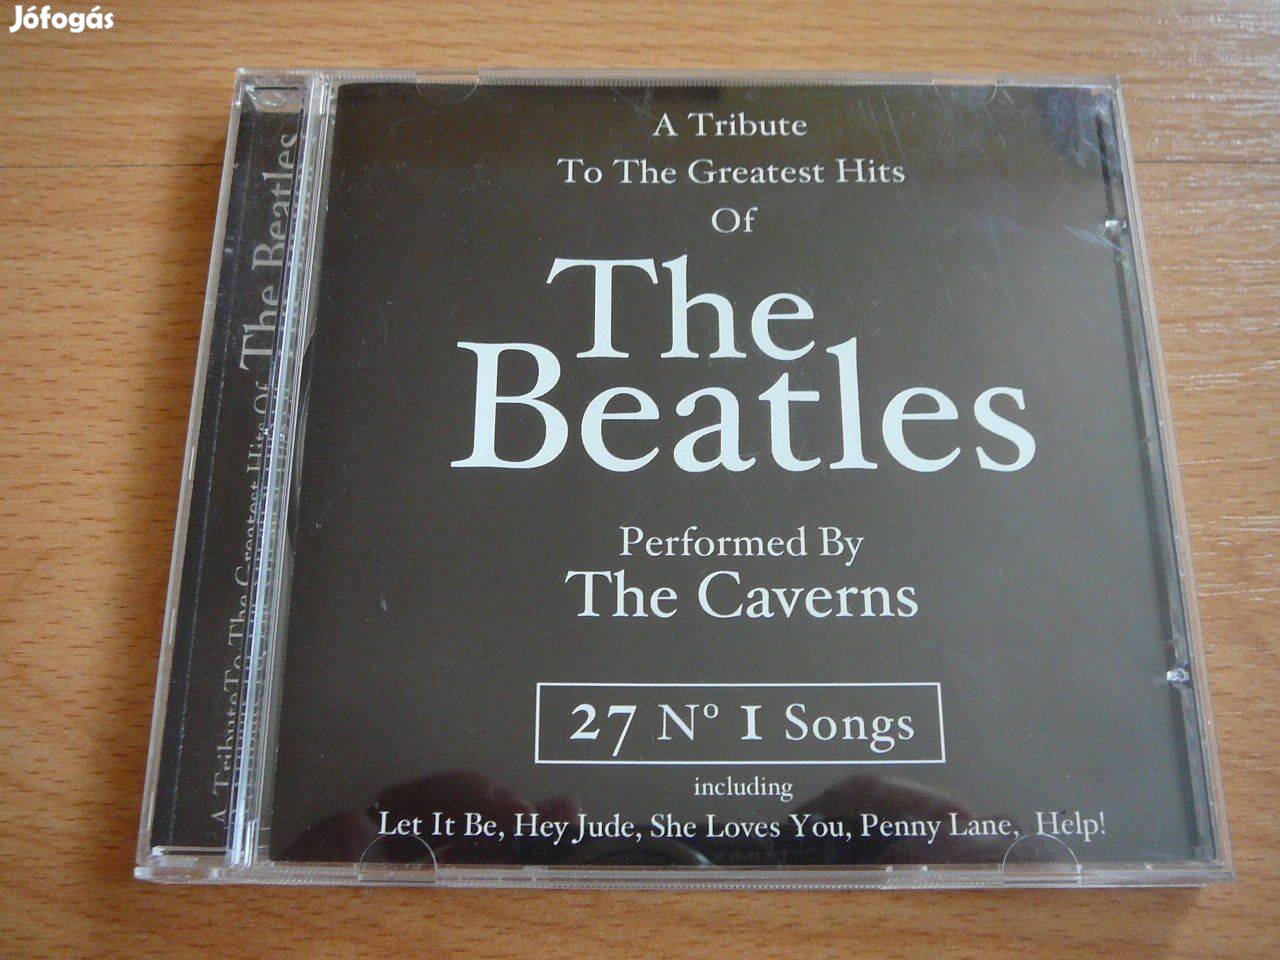 The Beatles: A Tribute To The Greatest Hits CD lemez